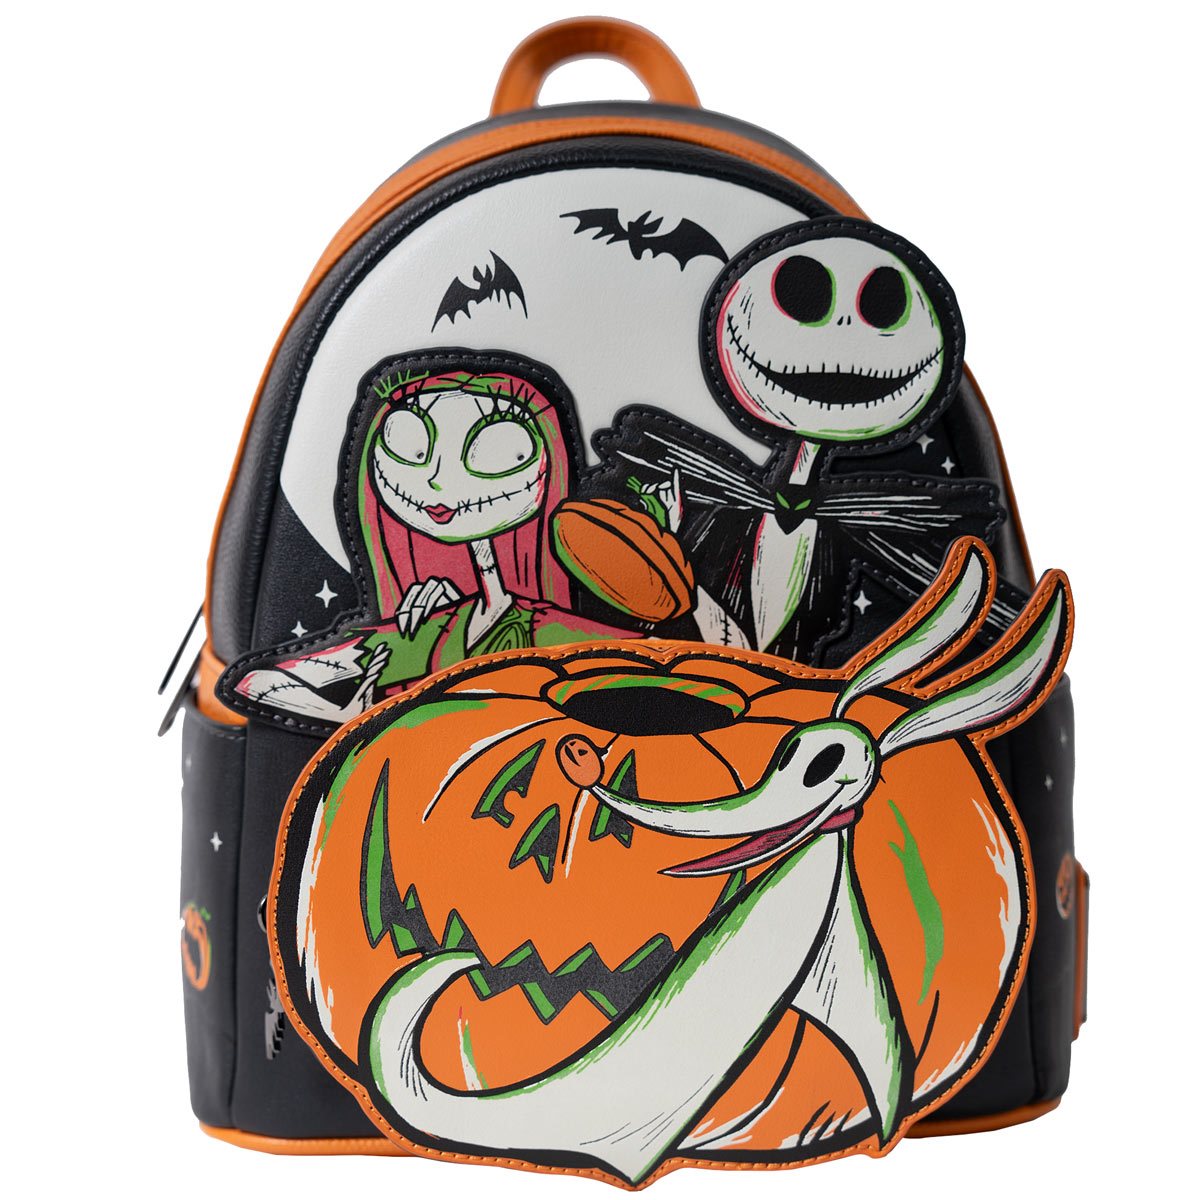 The Nightmare Before Christmas Disney 100 Glow-in-the-Dark Mini-Backpack - Entertainment Earth Exclusive